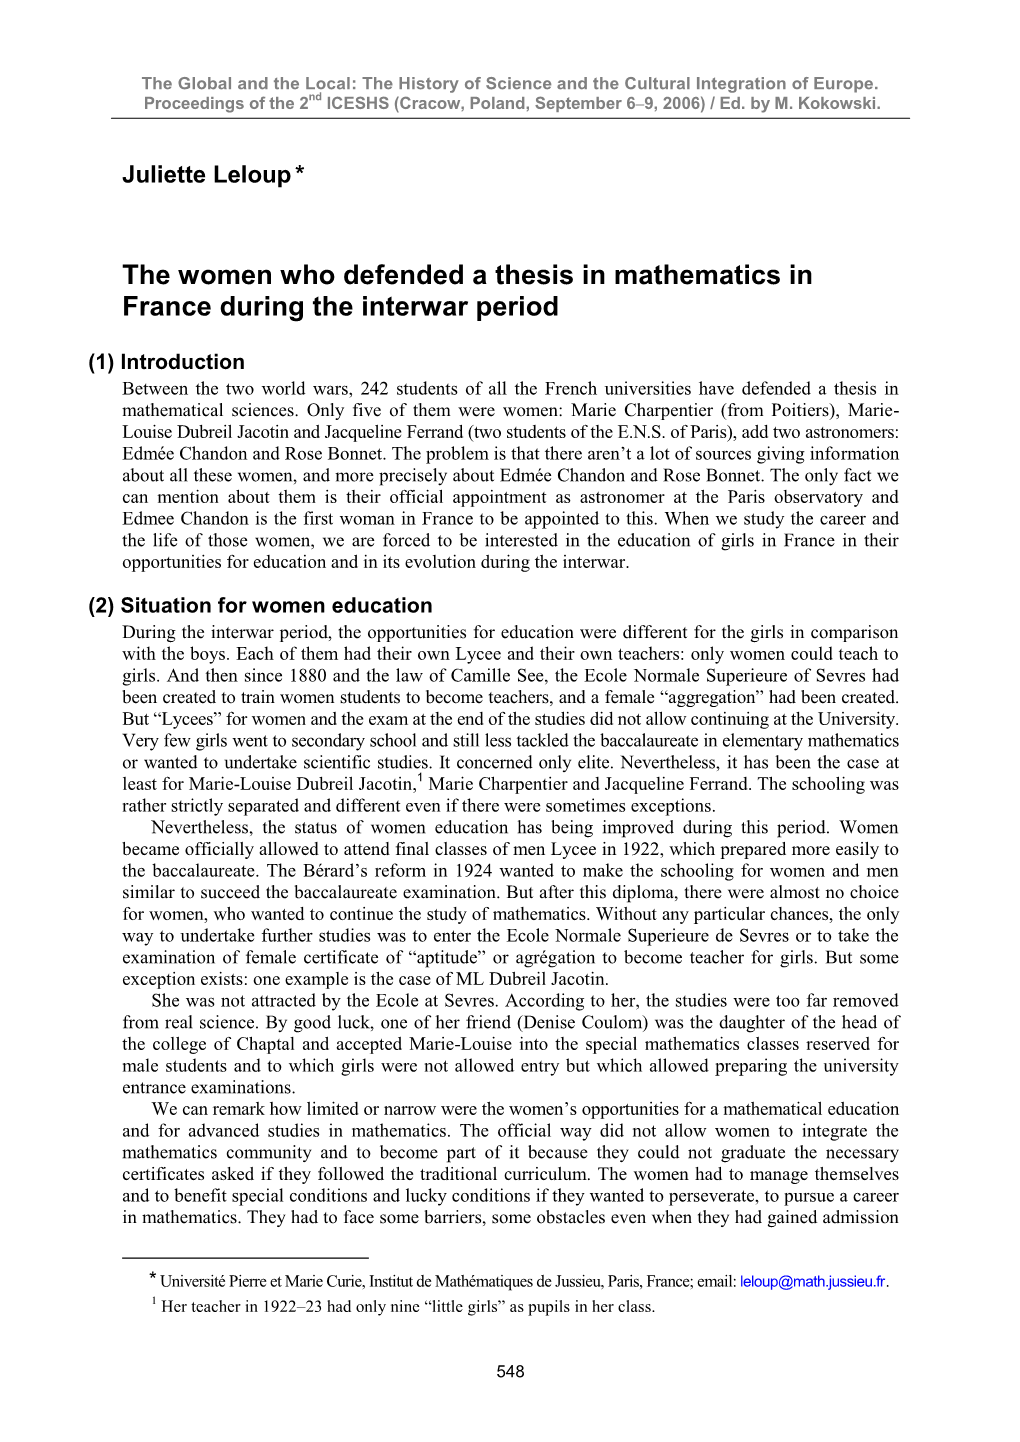 The Women Who Defended a Thesis in Mathematics in France During the Interwar Period